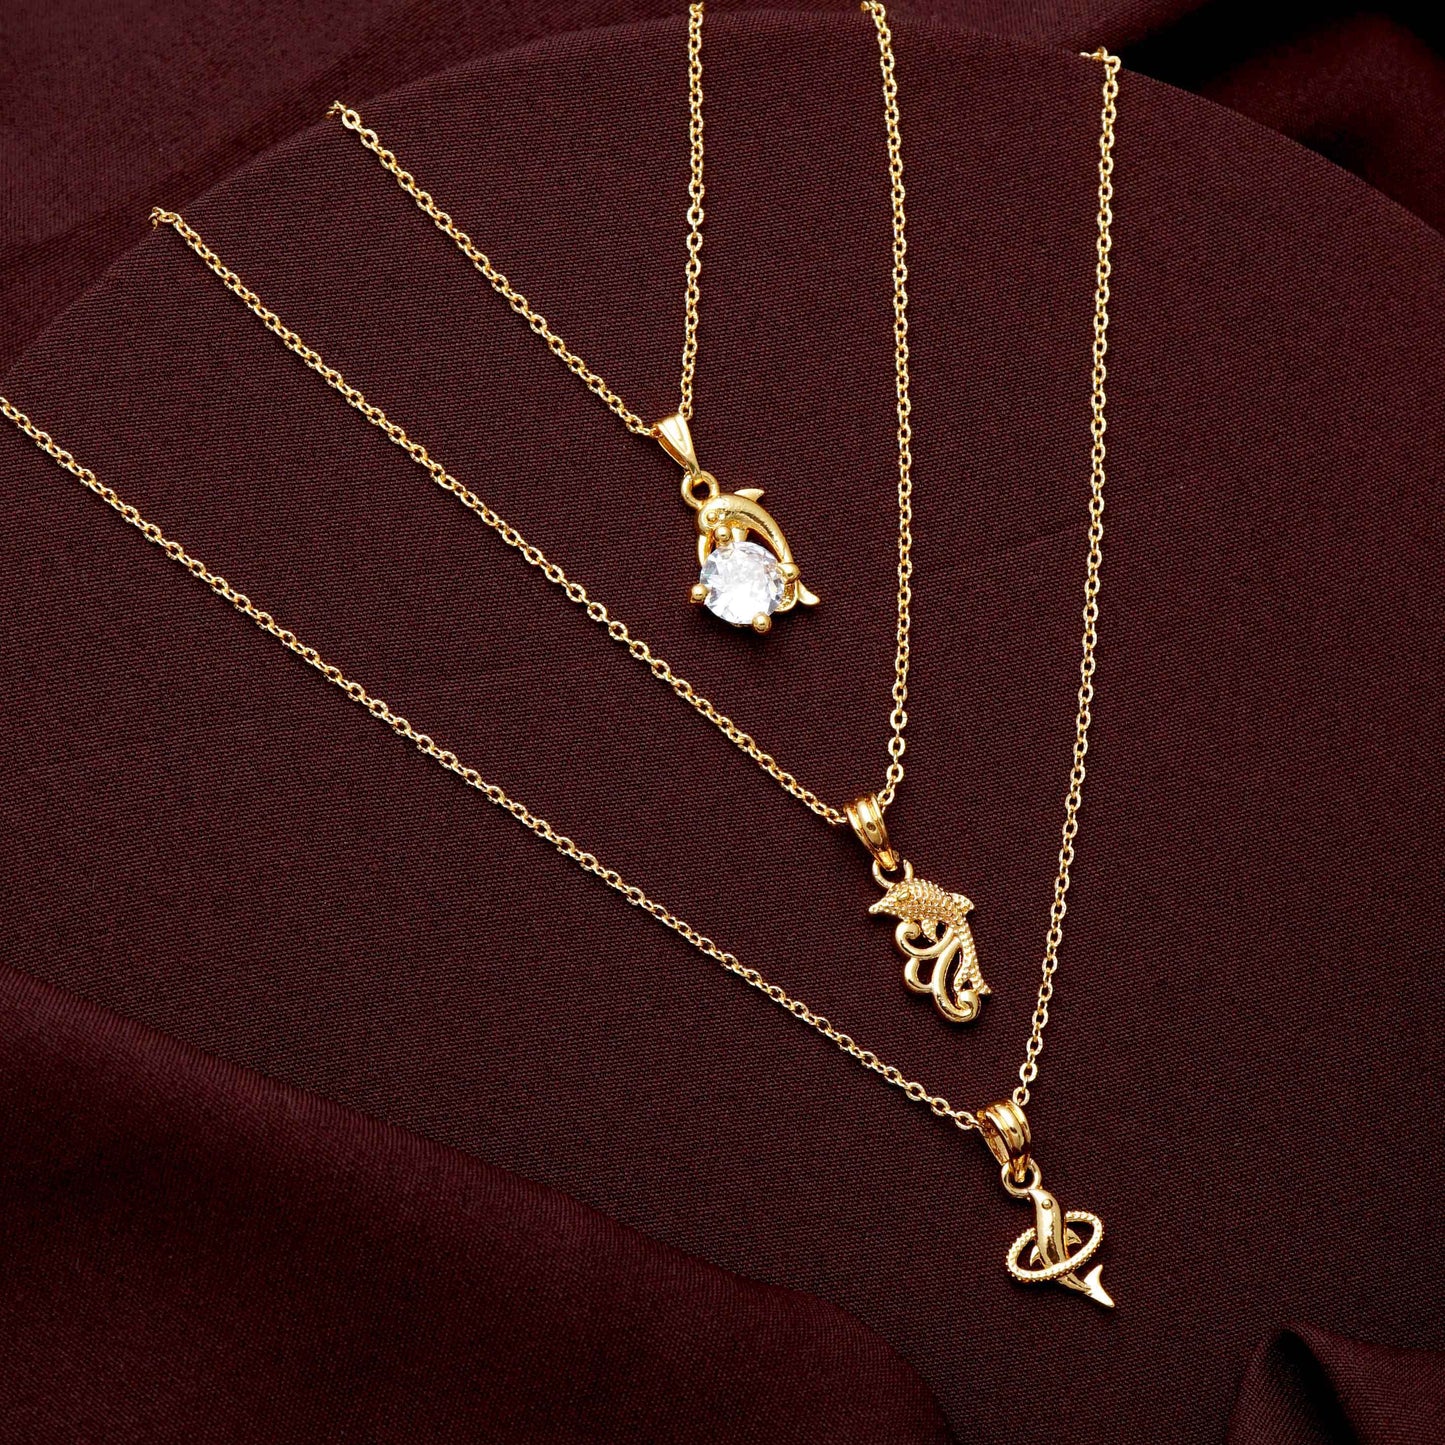 Pendant Chain Fish Machali Design Gold Plated Jewelry for Women & Girls or Men & Boys